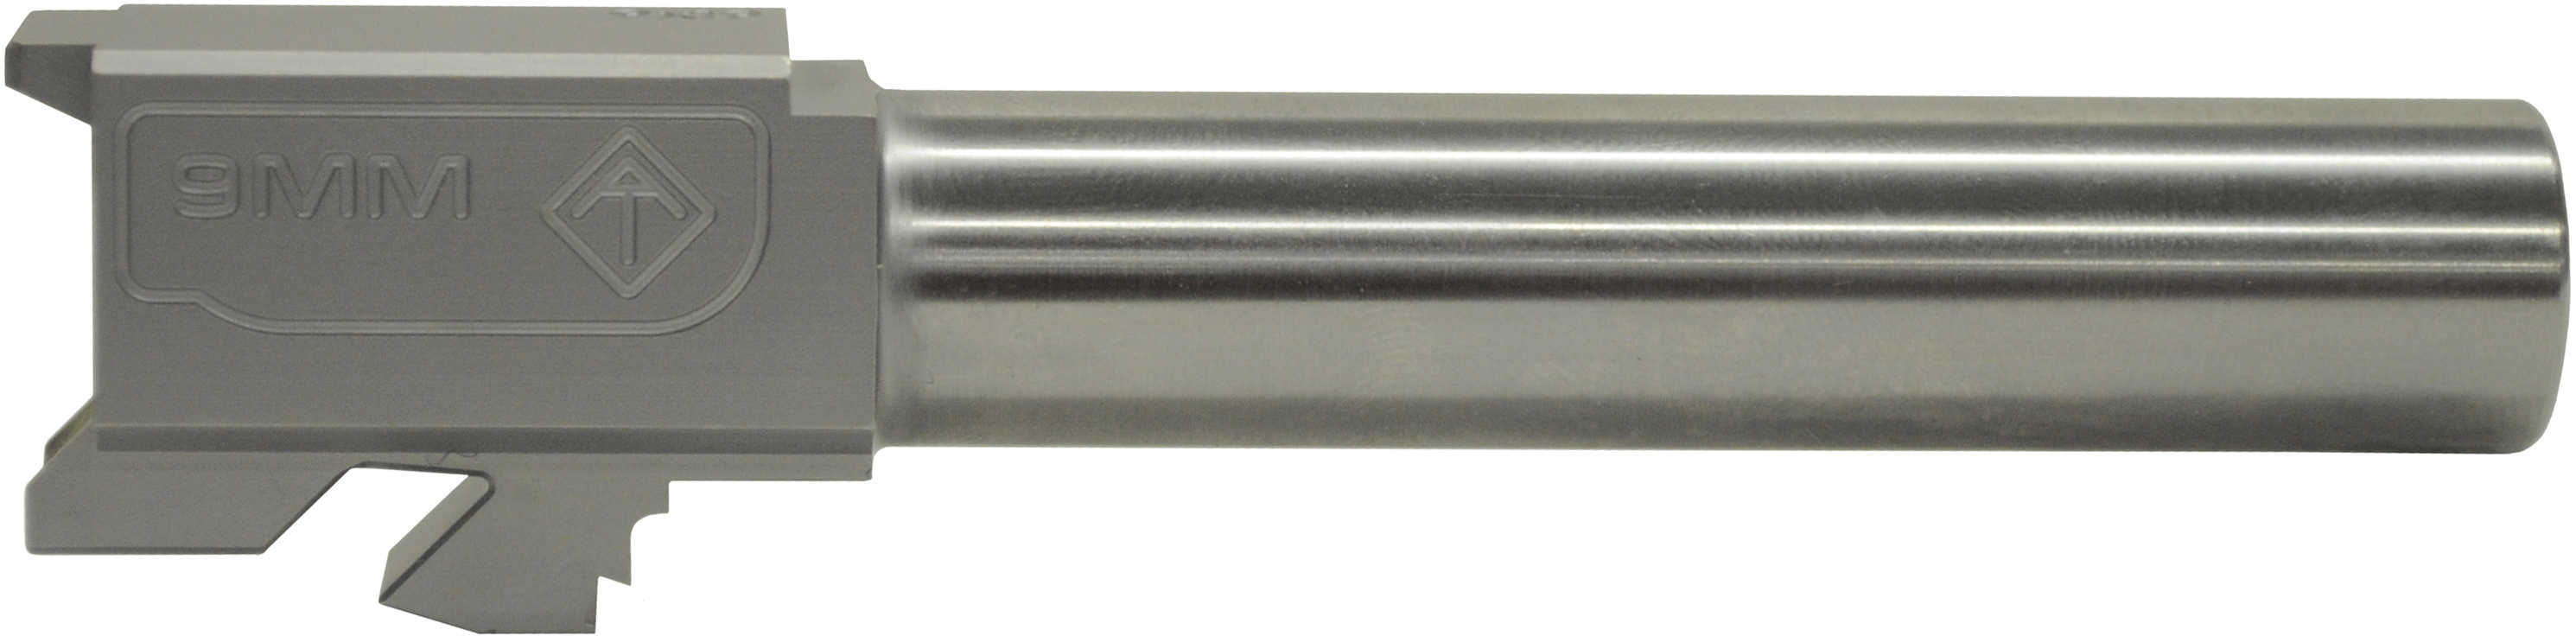 American Tactical Imports Match Grade Non Threaded Drop-in Barrel For Glock 19, 9mm Md: ATIBG19